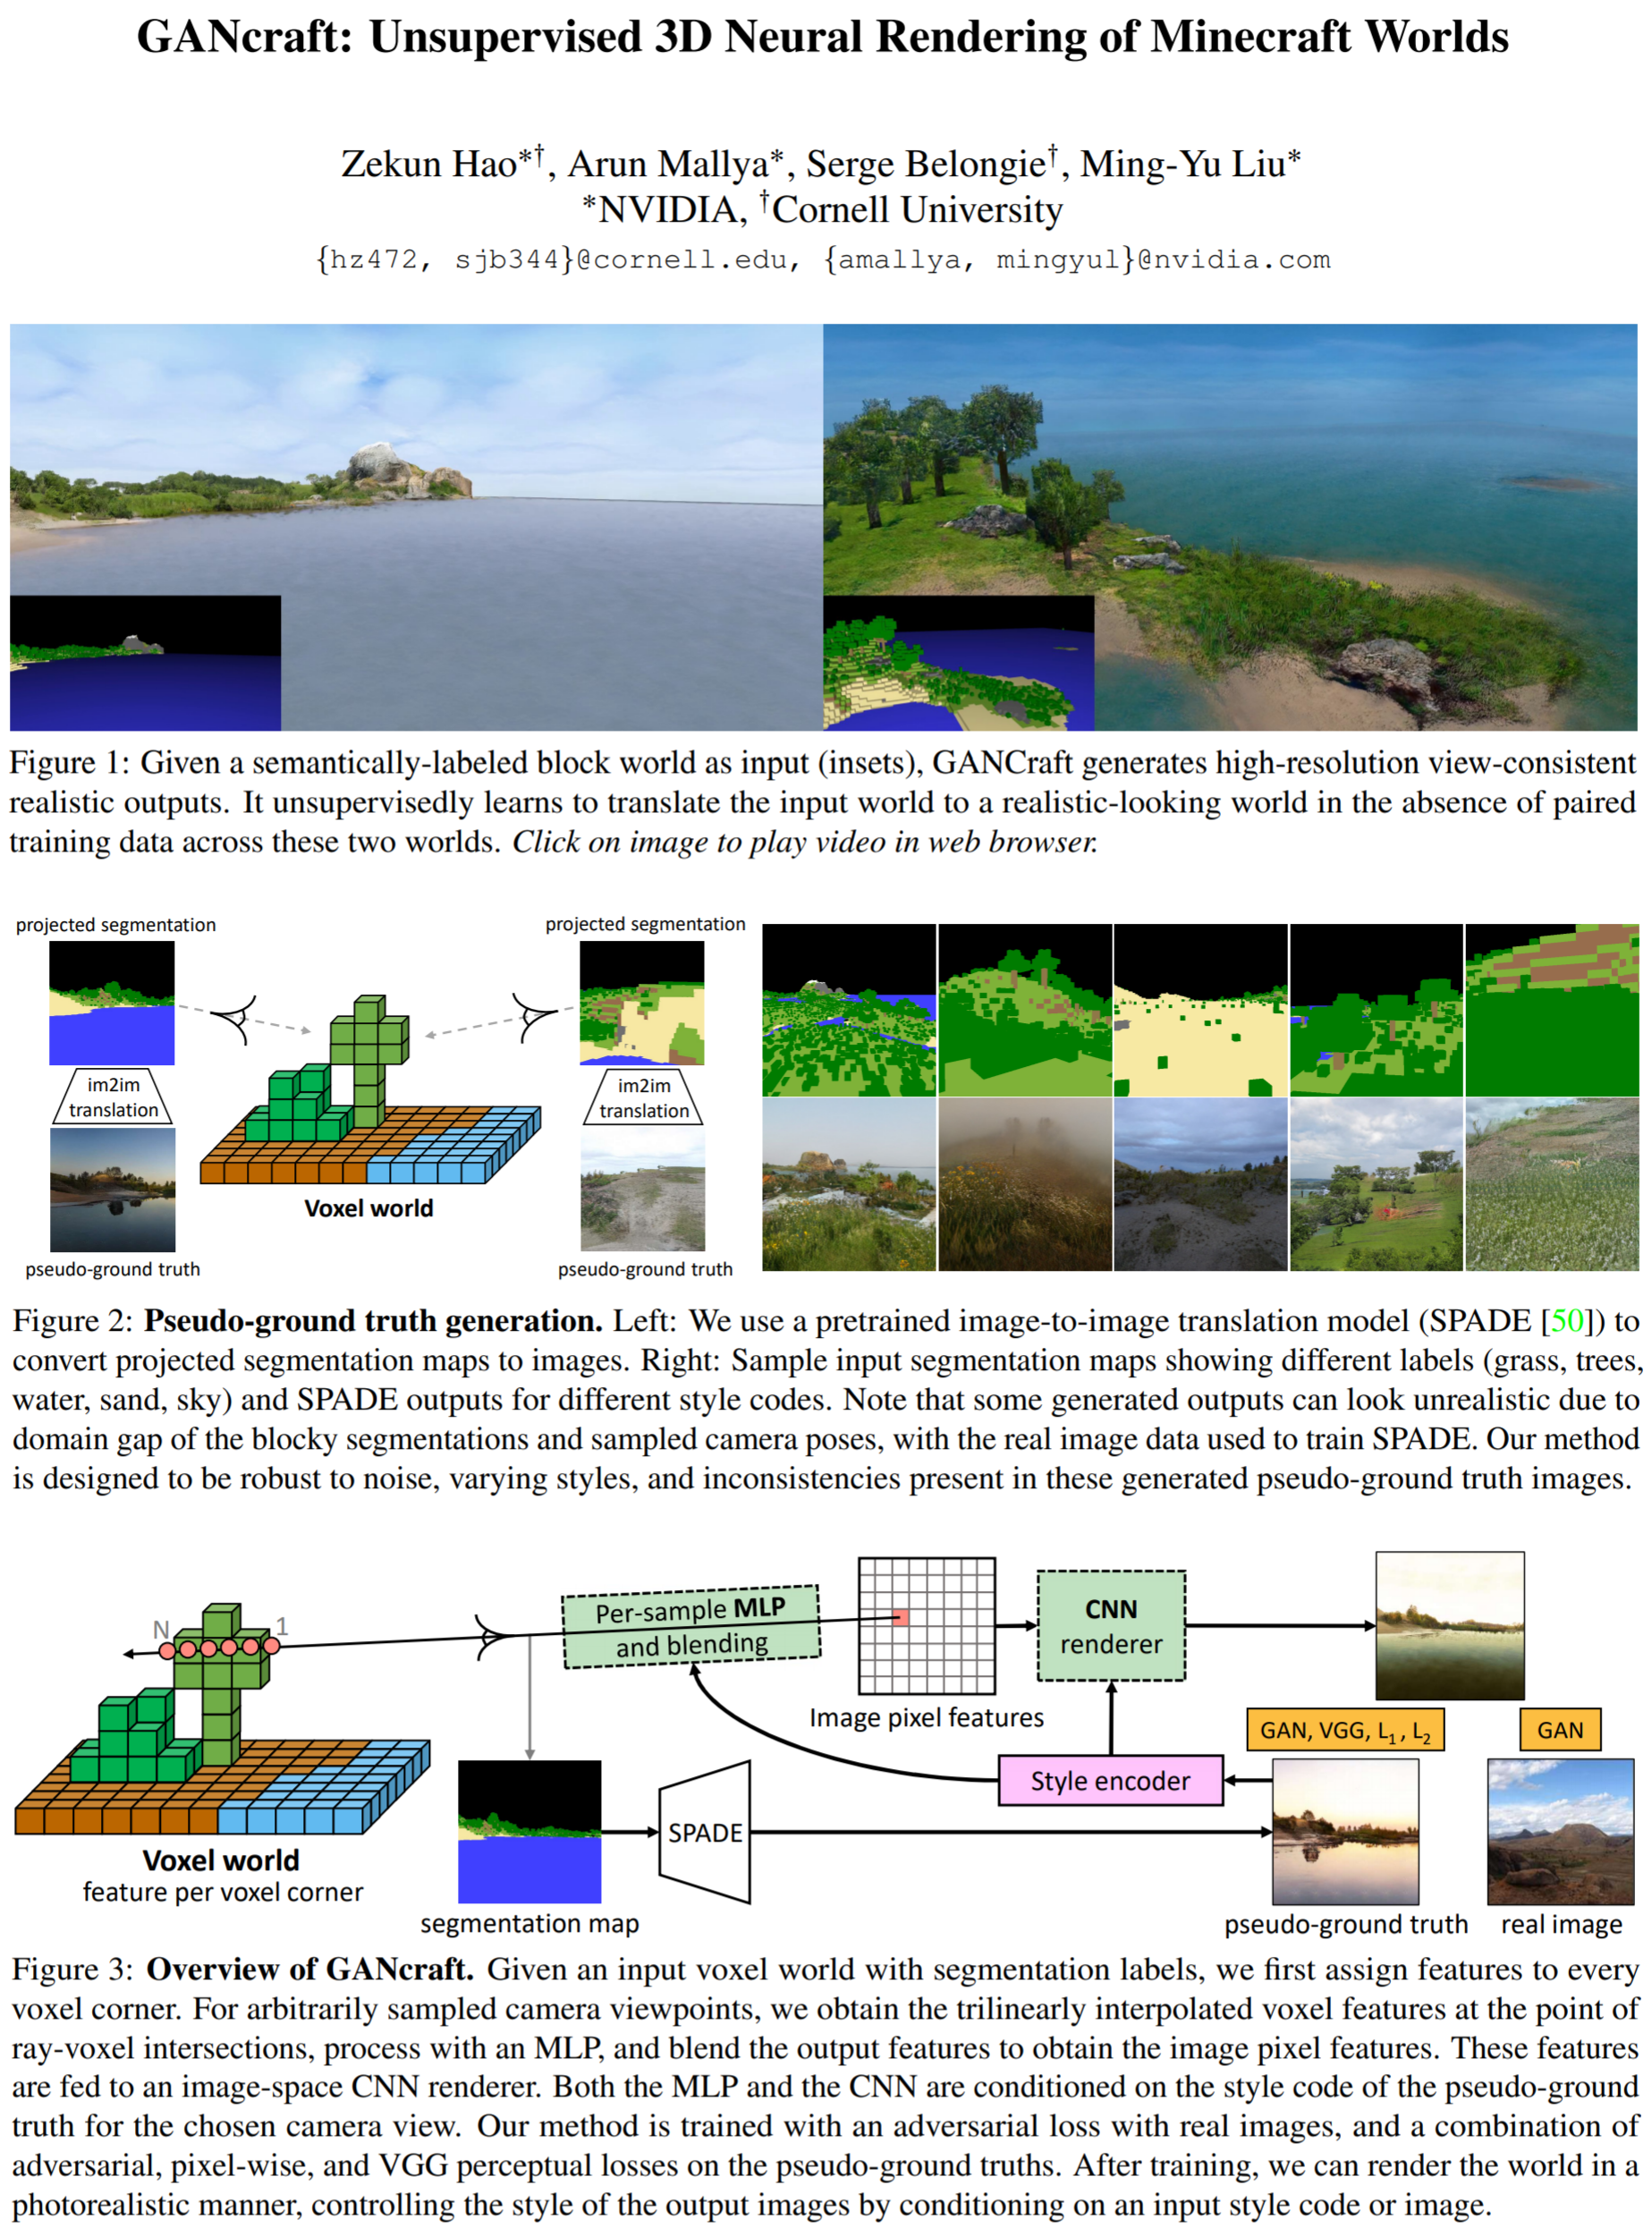 GANcraft: Unsupervised 3D Neural Rendering of Minecraft Worlds paper poster